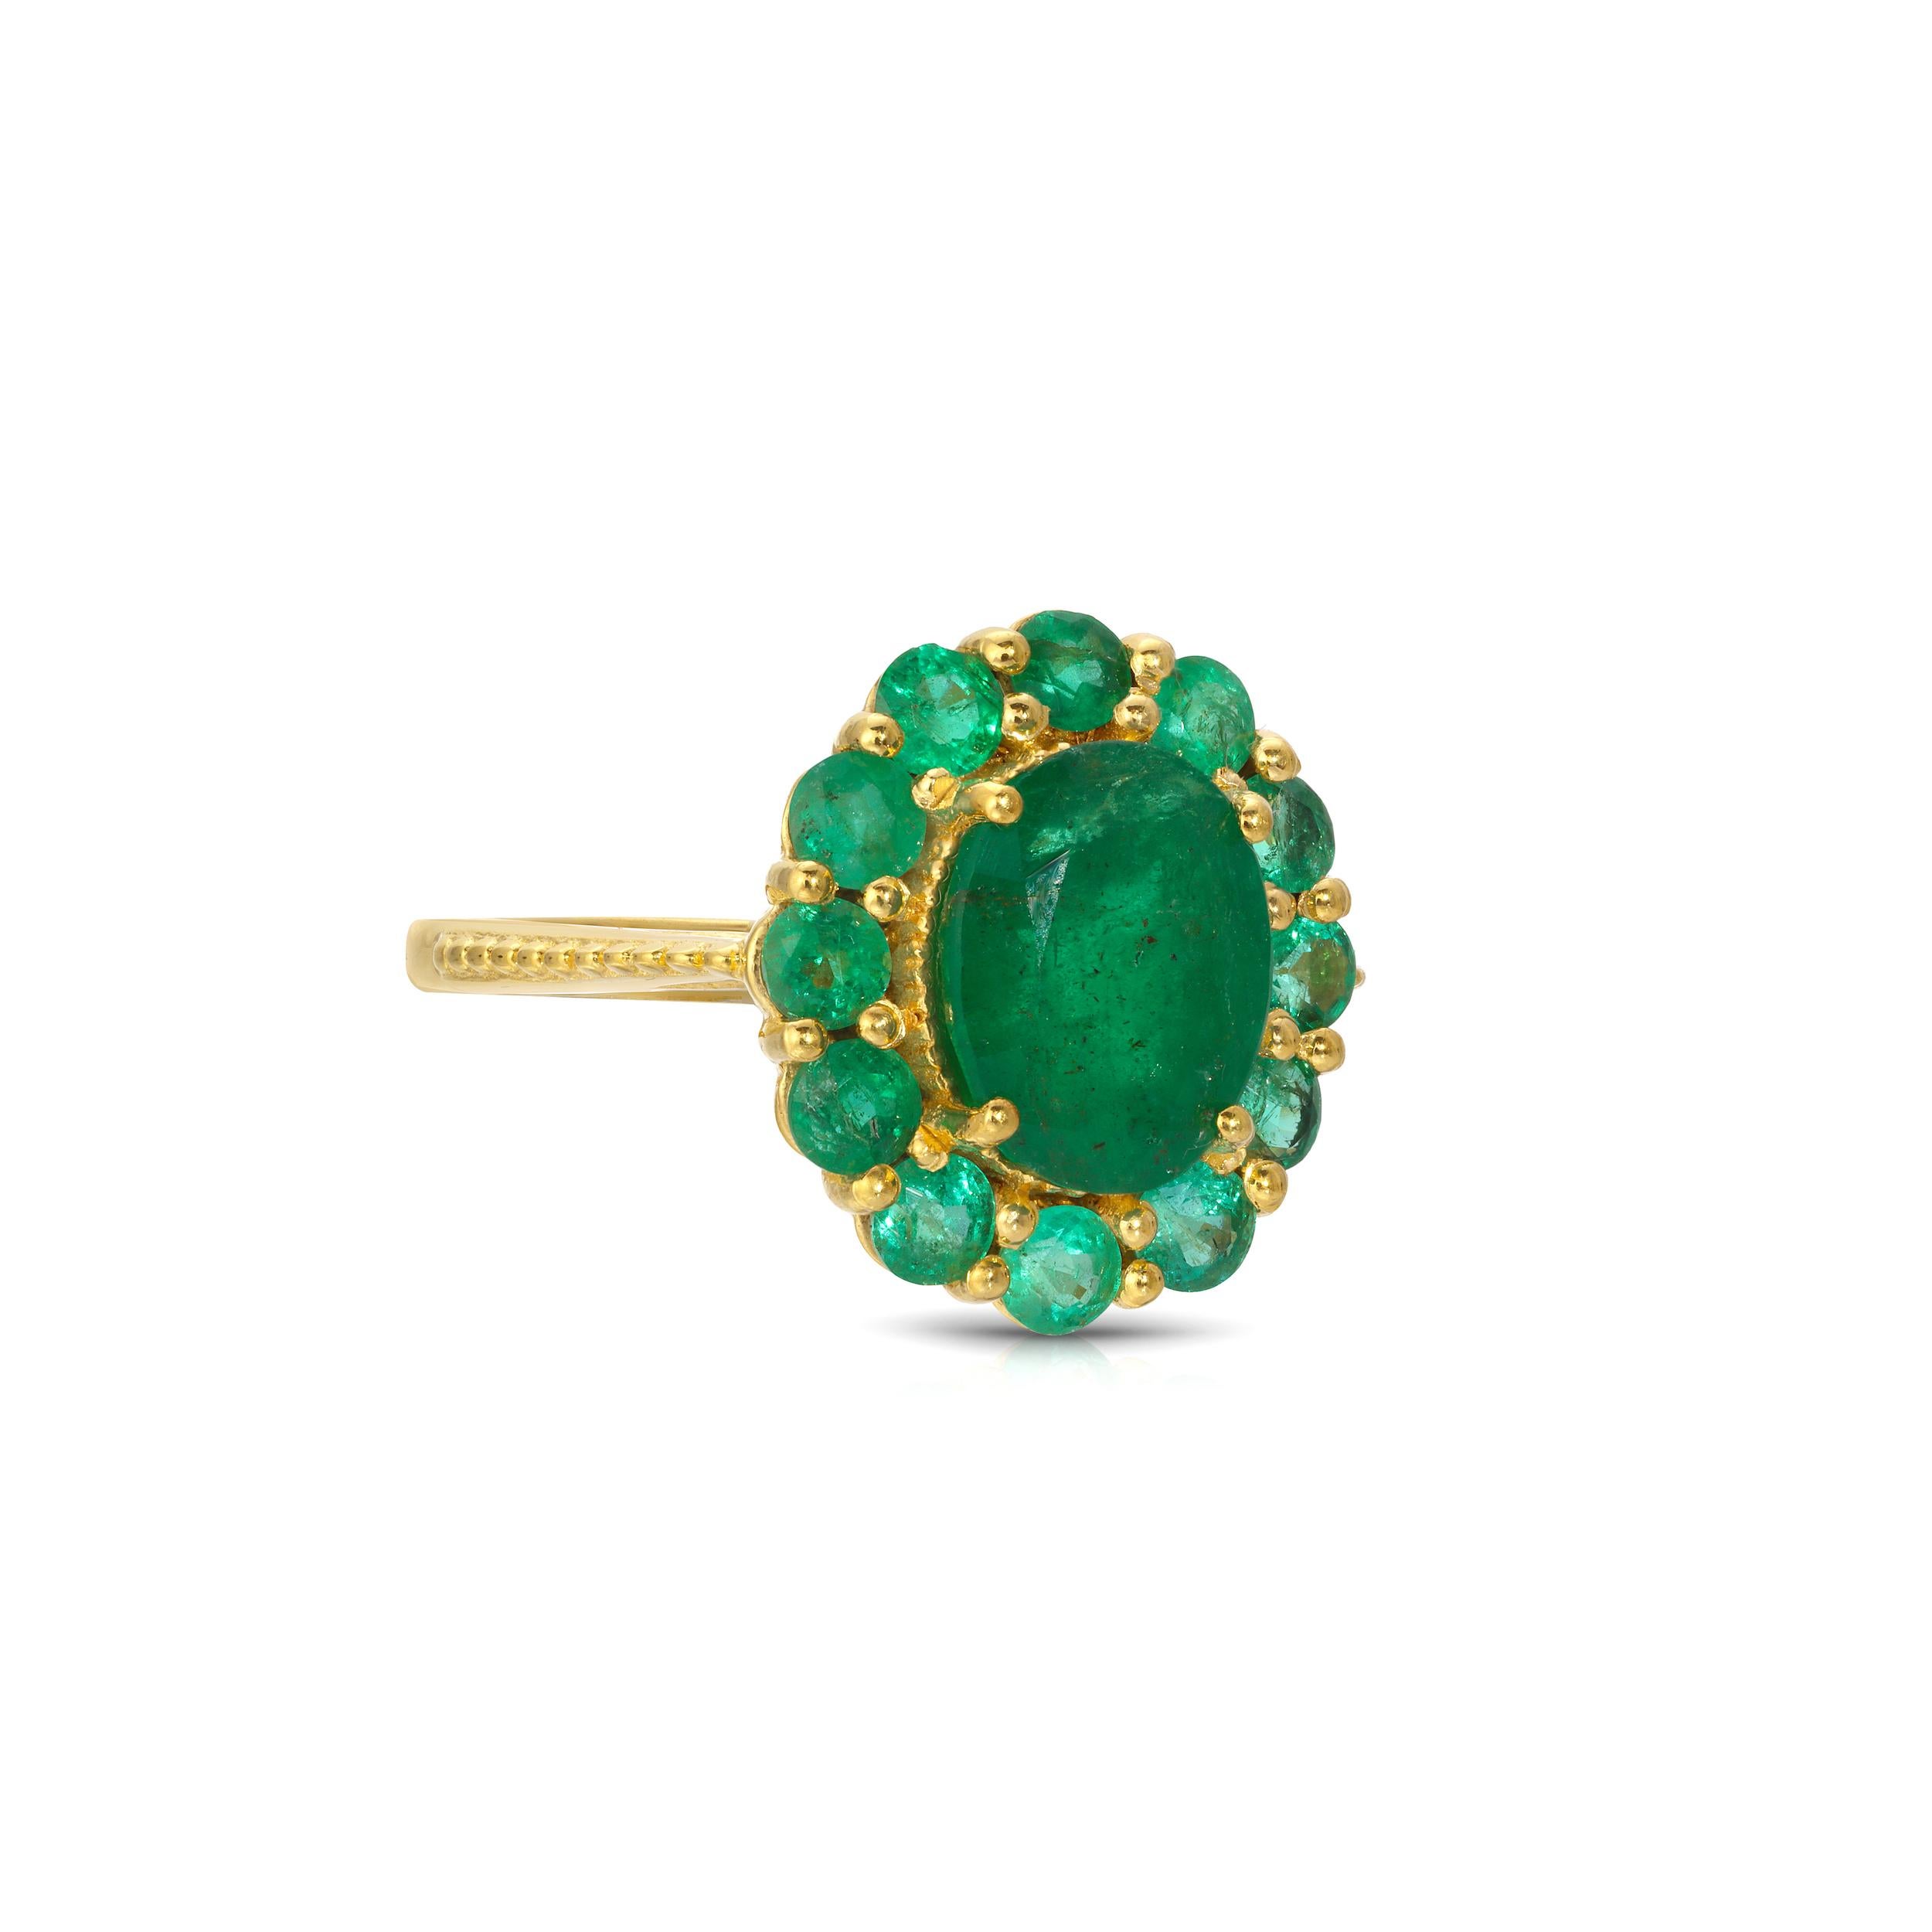 A stunning cocktail ring featuring vibrant gemstones. This ring features a fiery center emerald enhanced by a setting of faceted emeralds of exceptional clarity in a modern cluster design. This ring is set in 22 Karat Gold overlay Silver and